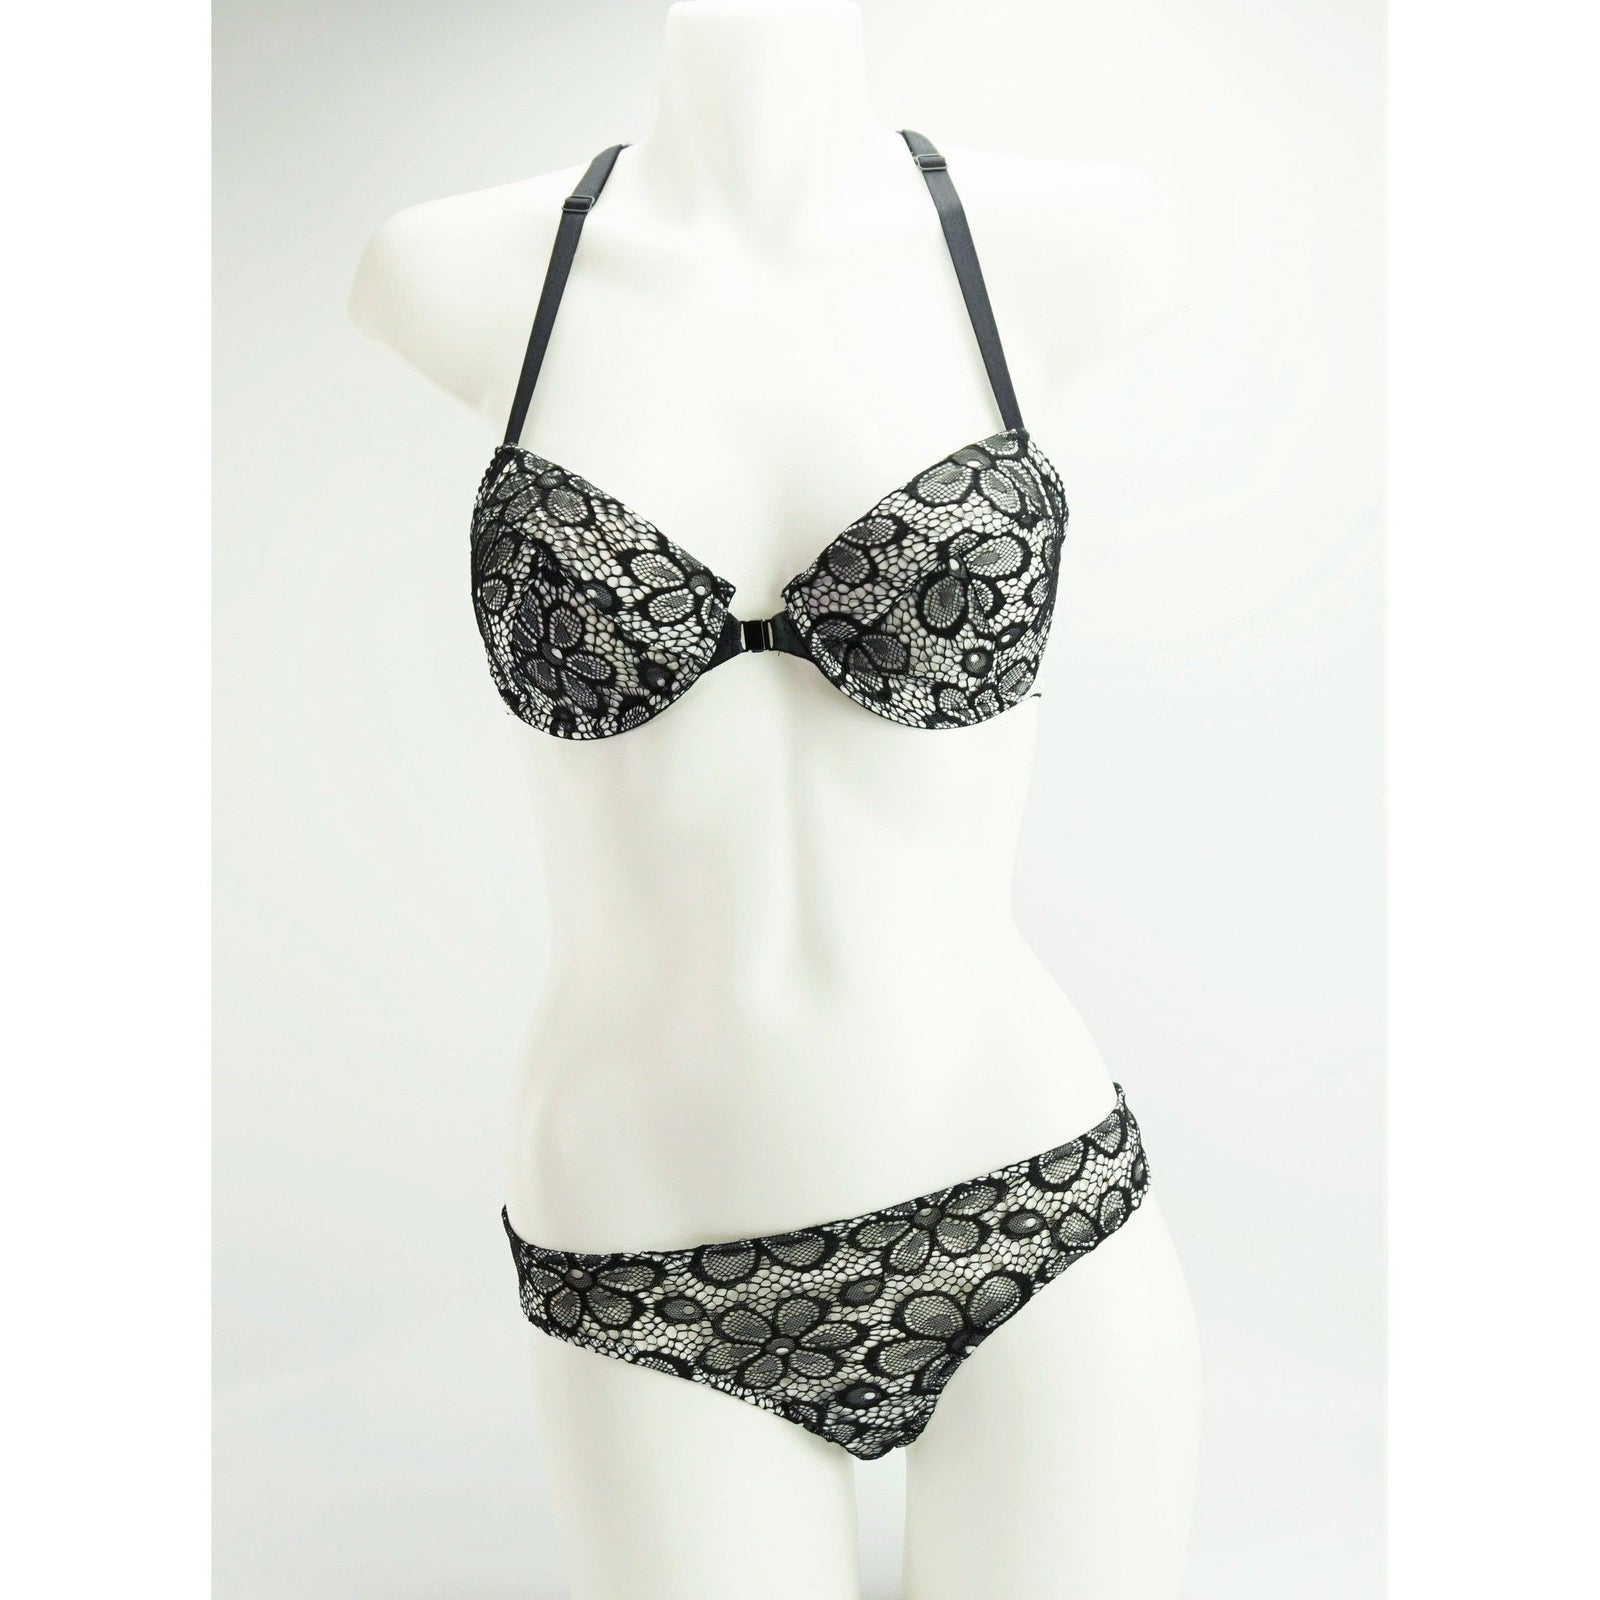 Lingerie Set - Priscilla Kai Tailor Bra Mikayla Saleem Thong In Black/White With Floral Lace Overlay